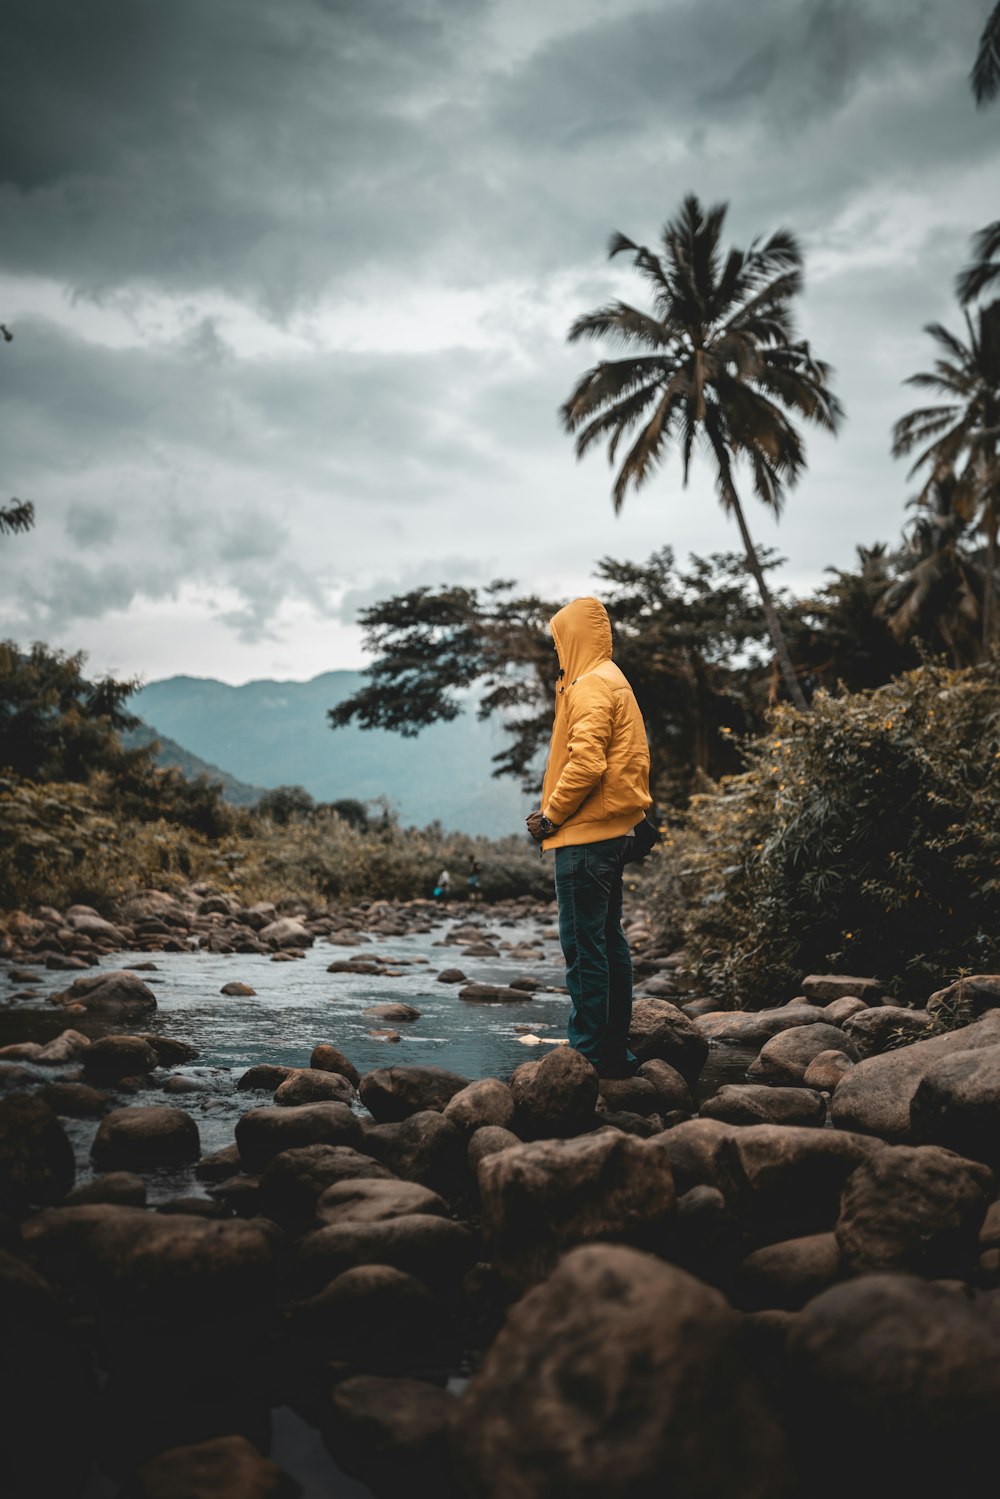 a person in a yellow jacket standing on rocks